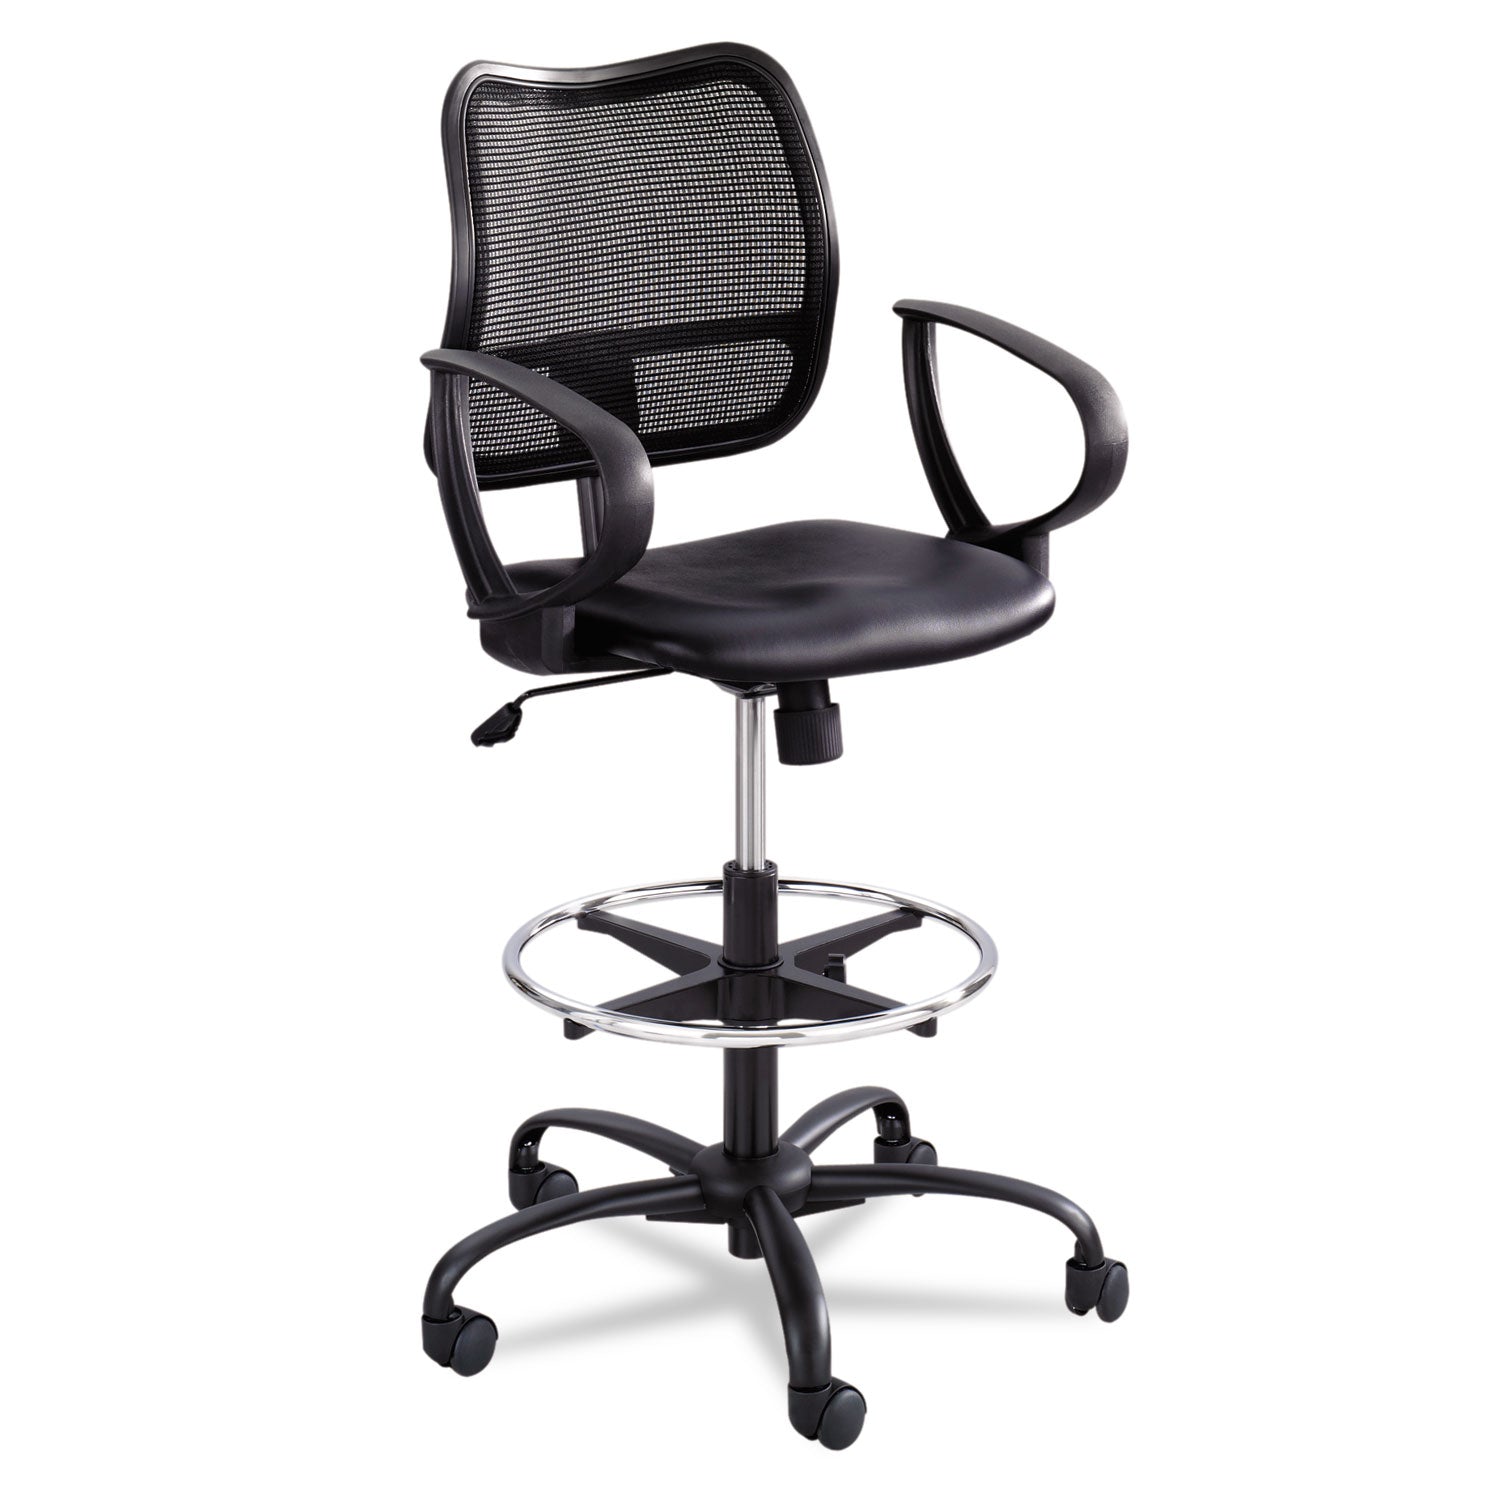 Vue Series Mesh Extended-Height Chair, Supports Up to 250 lb, 23" to 33" Seat Height, Black Vinyl Seat, Black Base - 